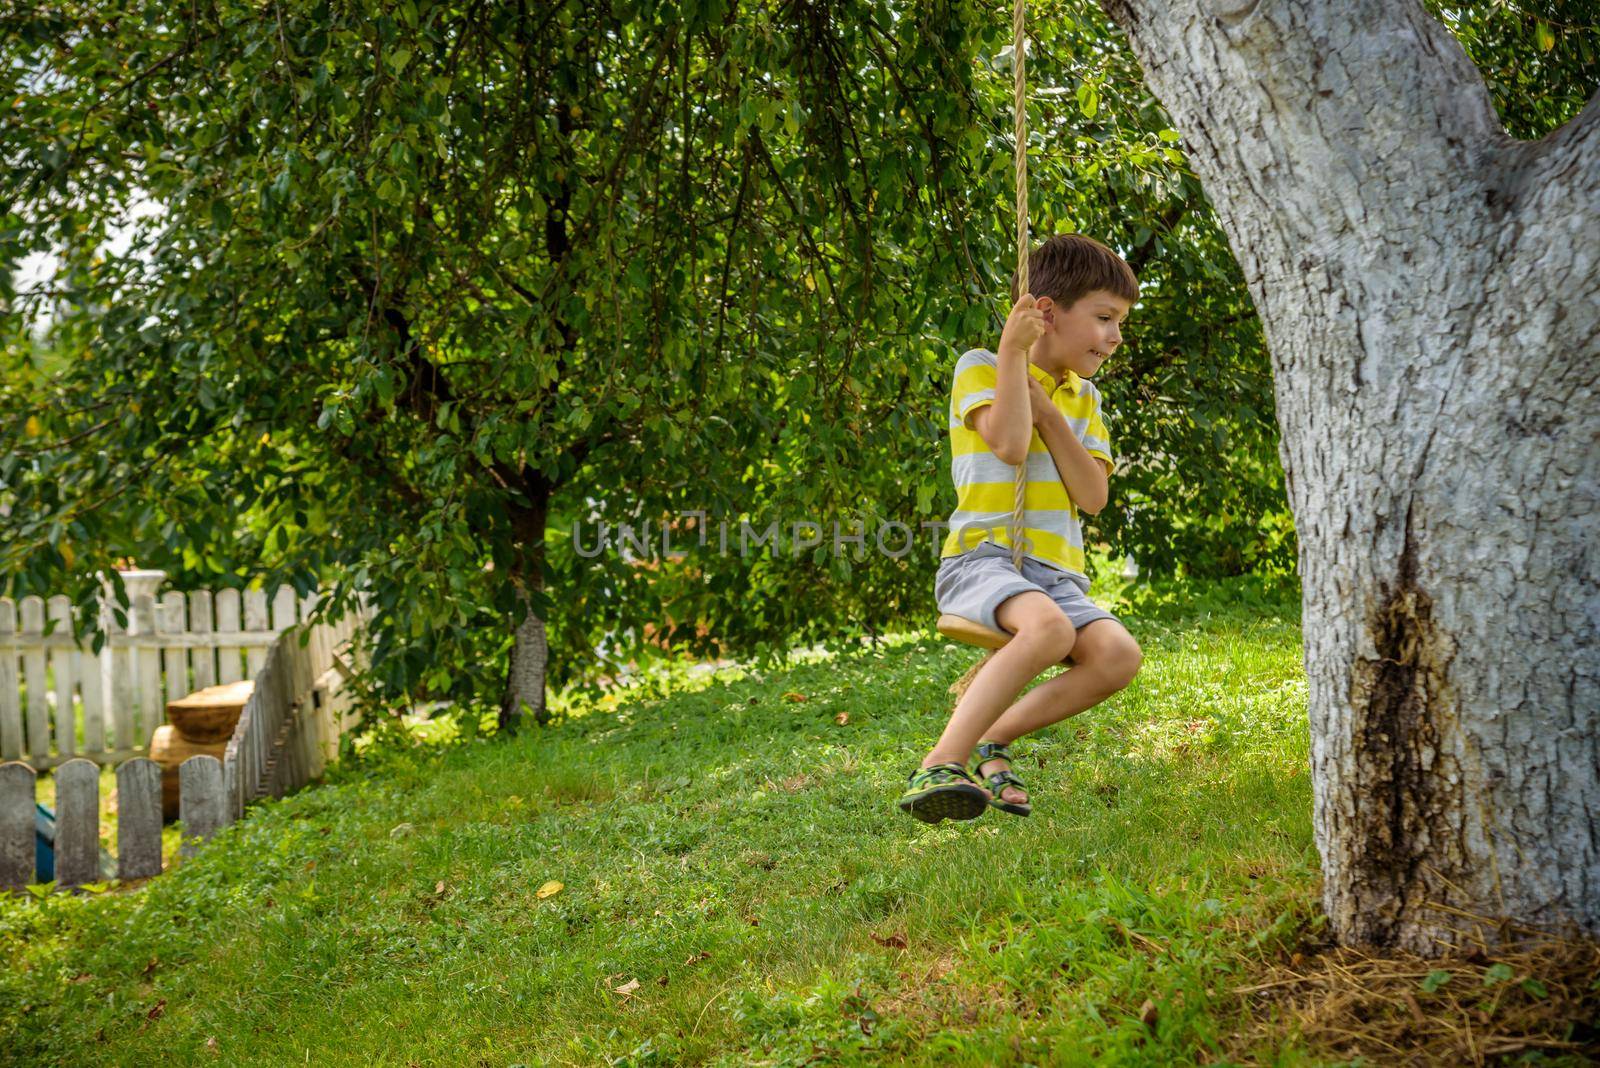 Happy little boy is having fun on a rope swing which he has found while having rest outside city. Active leisure time with children by Kobysh